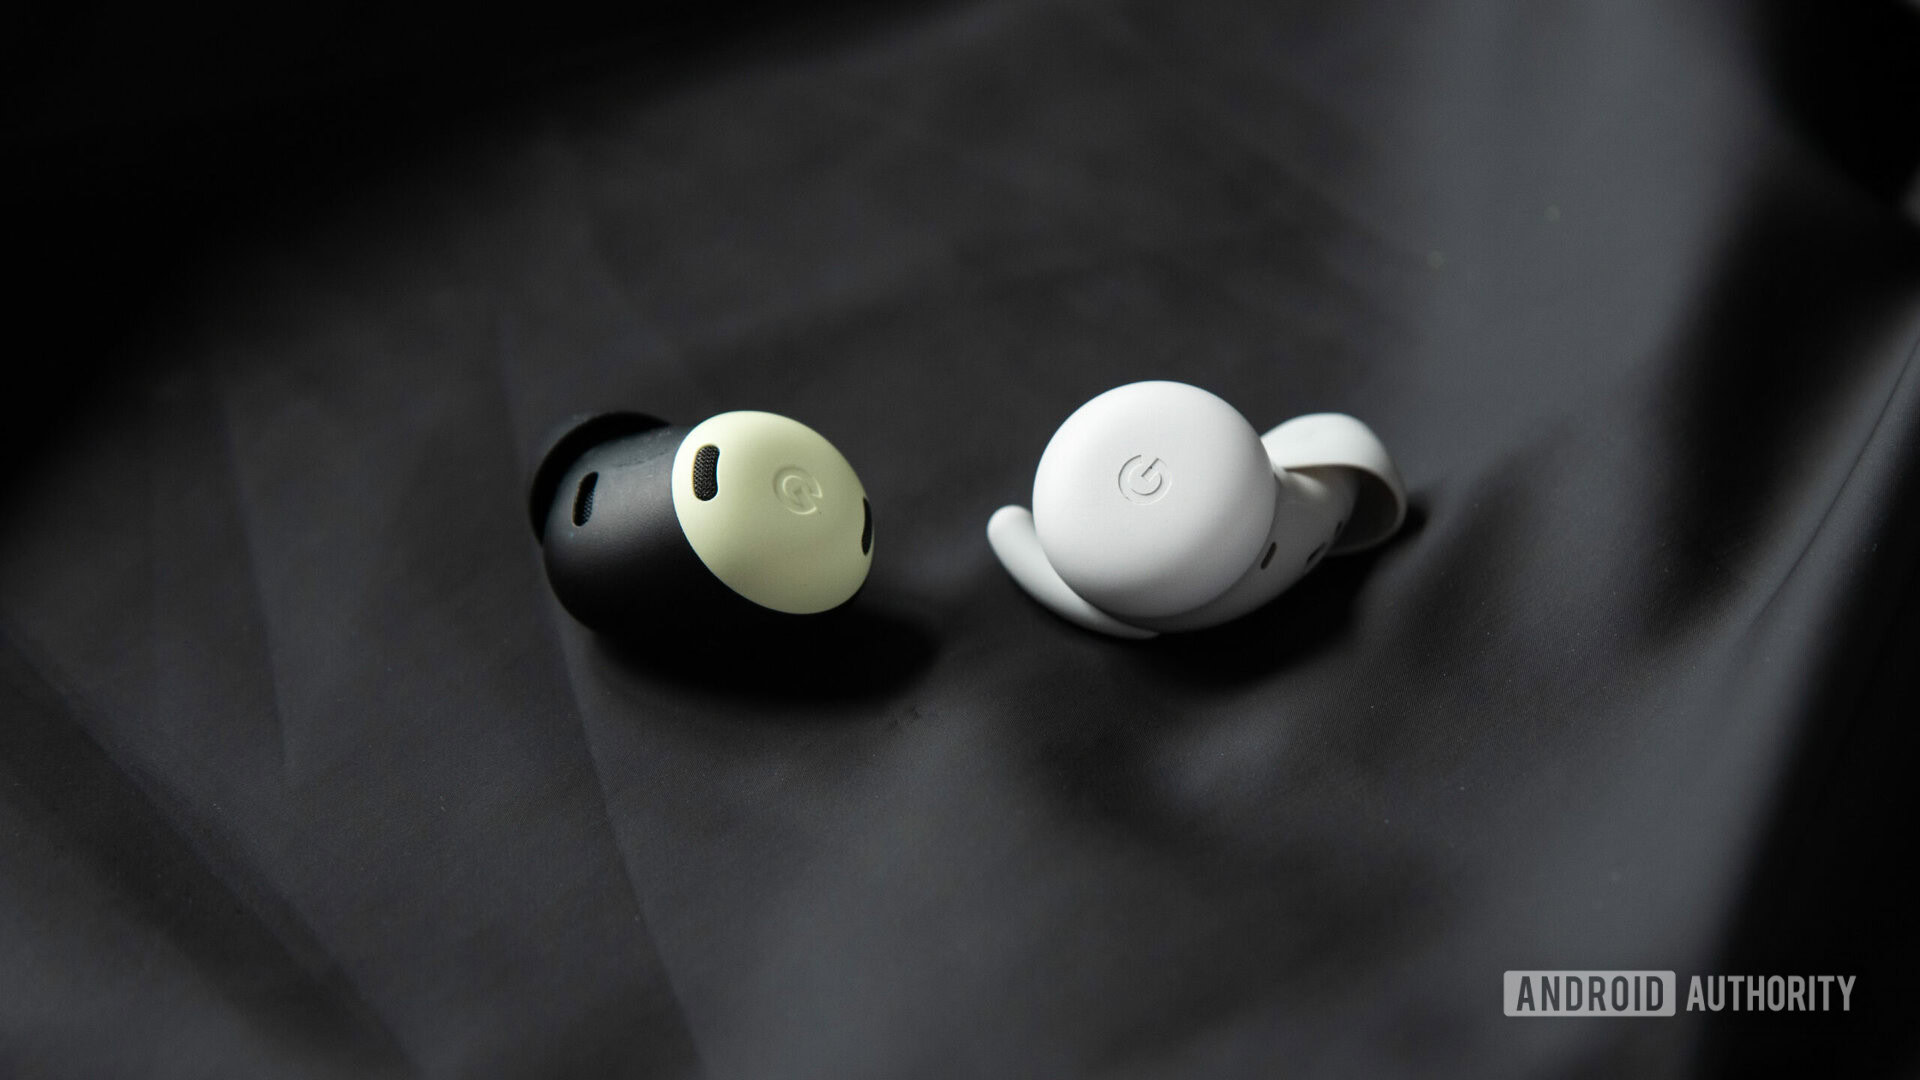 Google Pixel Buds Pro 2 wishlist: All the features I want to see